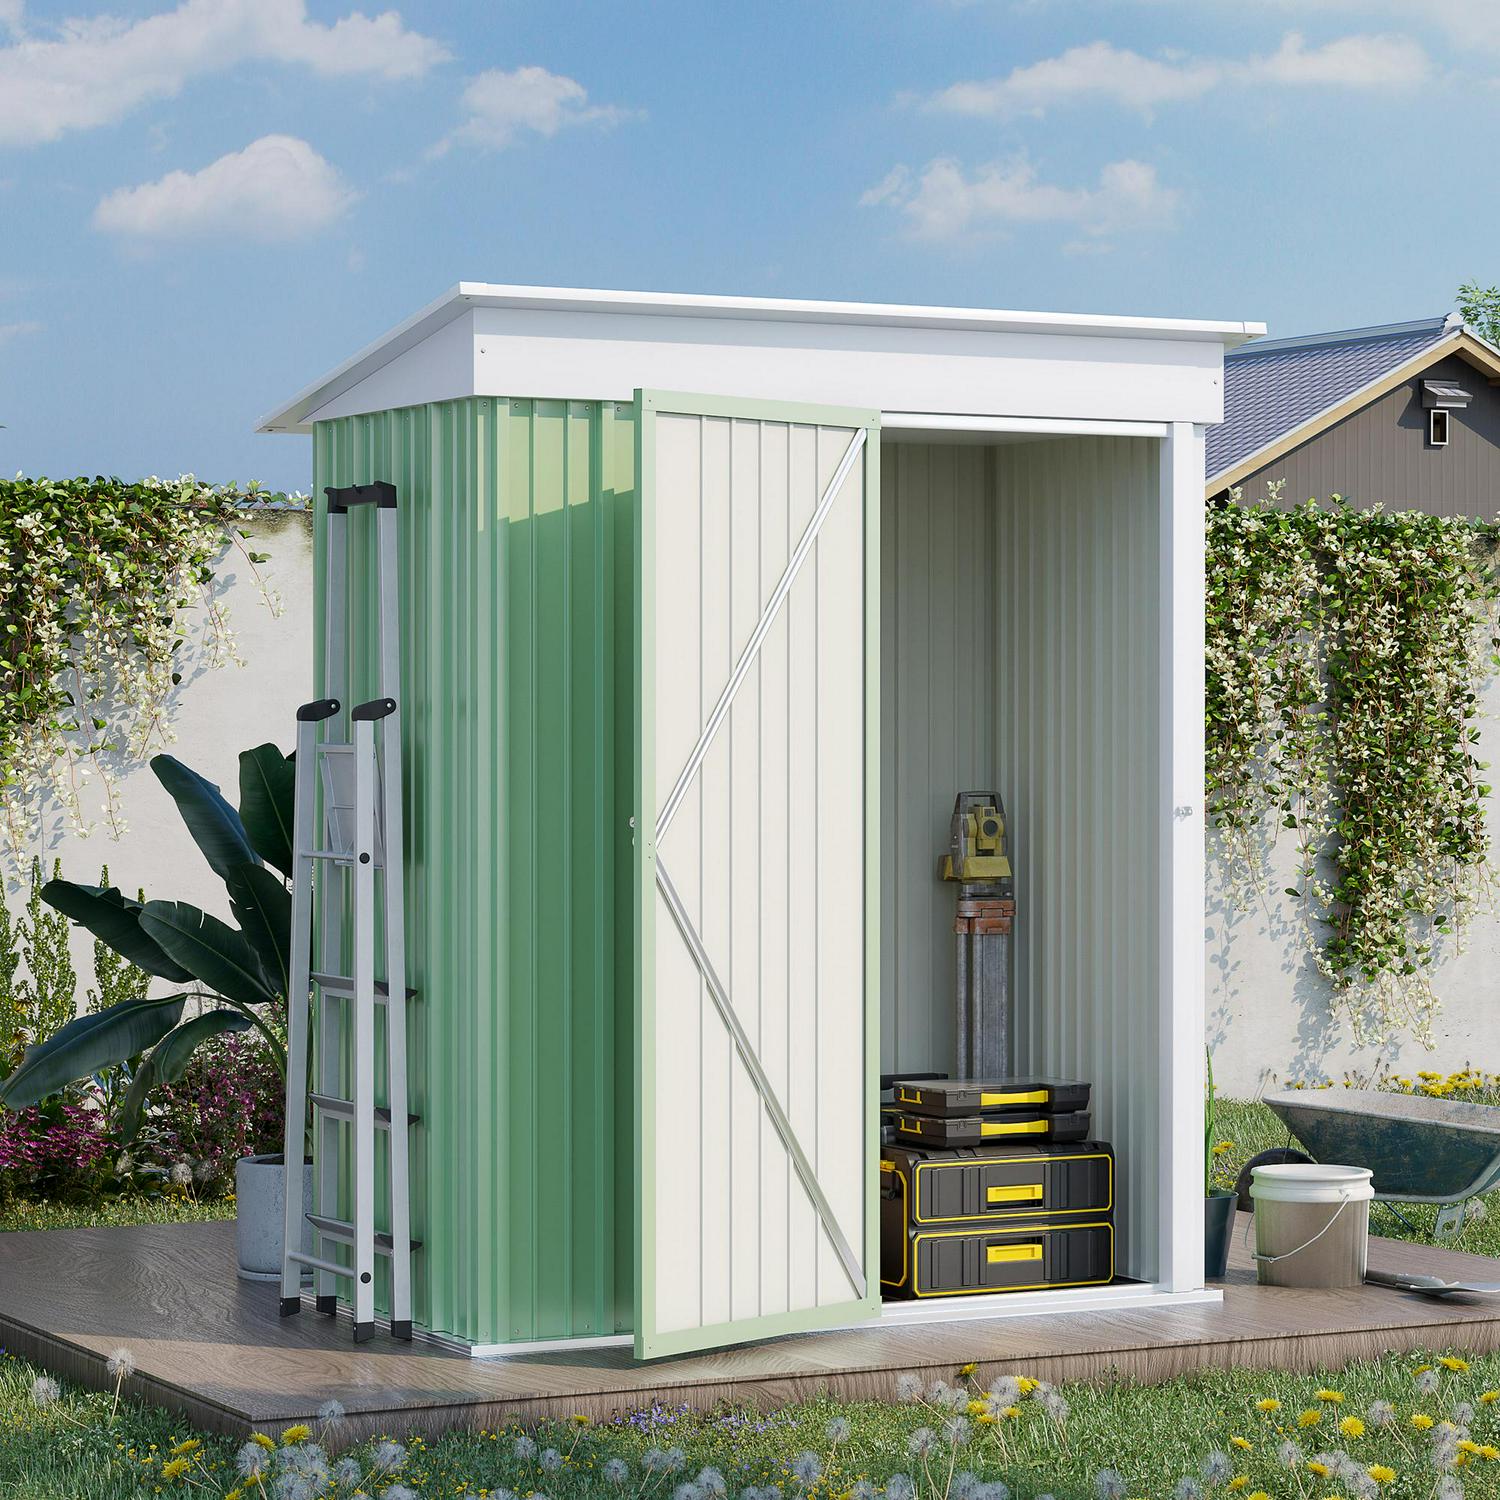 5'x3'x6' Metal Garden Shed, Outdoor Lean-to For Tool Motor Bike, With Adjustable Shelf, Lock, Gloves, Green And White